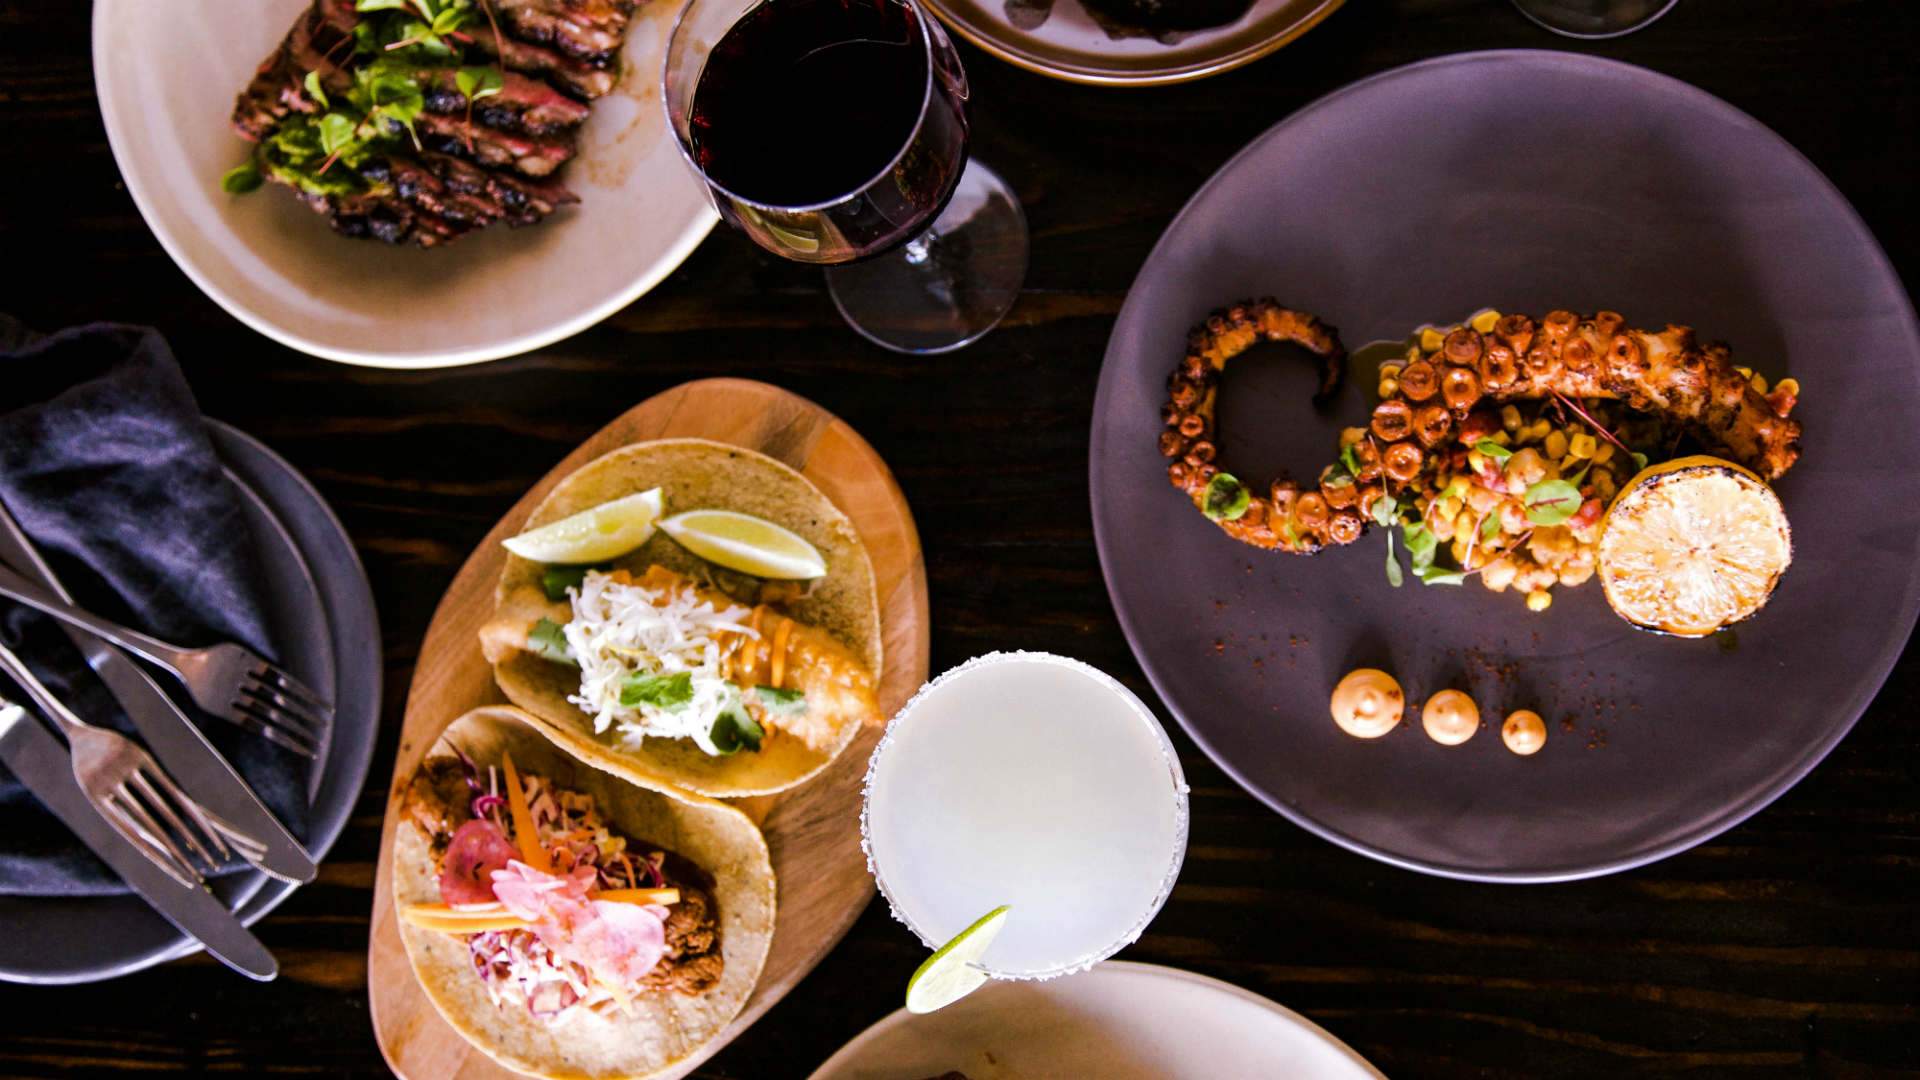 We're Giving Away a Mexican Feast for You and Your Mates